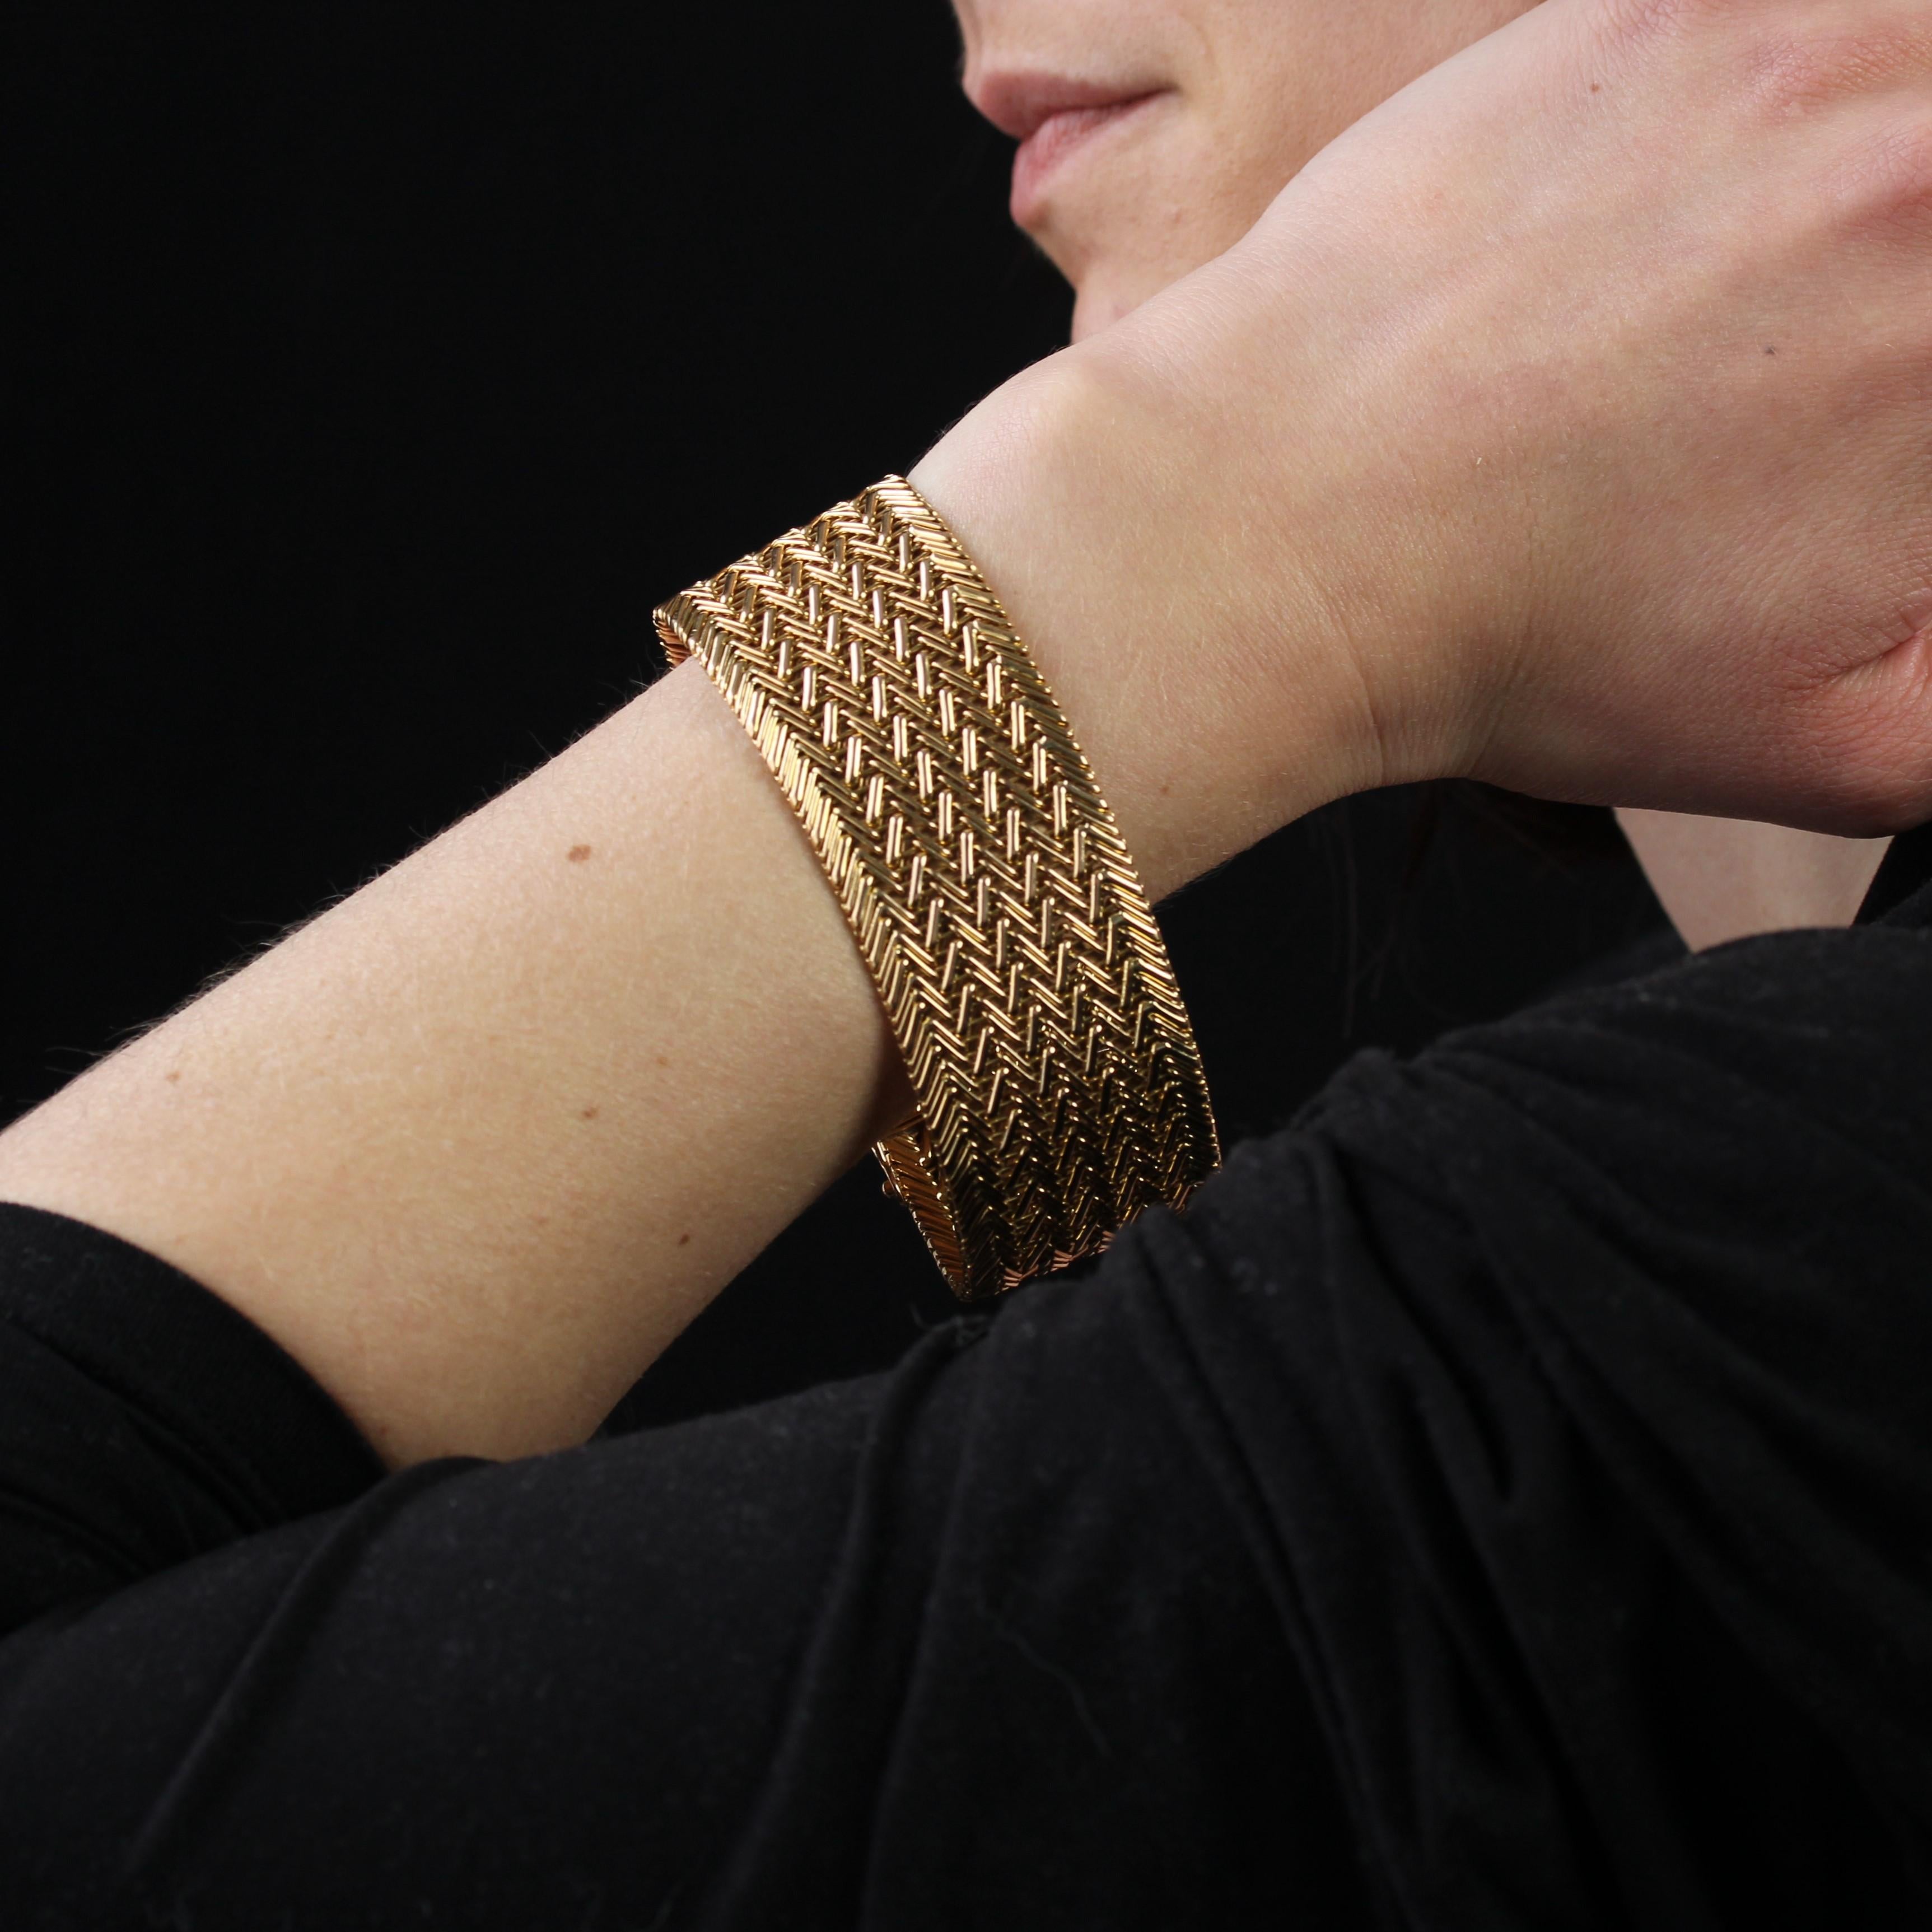 Bracelet in 18 karat yellow gold, eagle and rhinoceros heads hallmarks.
An important and supple vintage bracelet, it is formed of a flat mesh like a twill over its entire length. The clasp is a large ratchet with two 8 safety catches.
Length : 21 cm